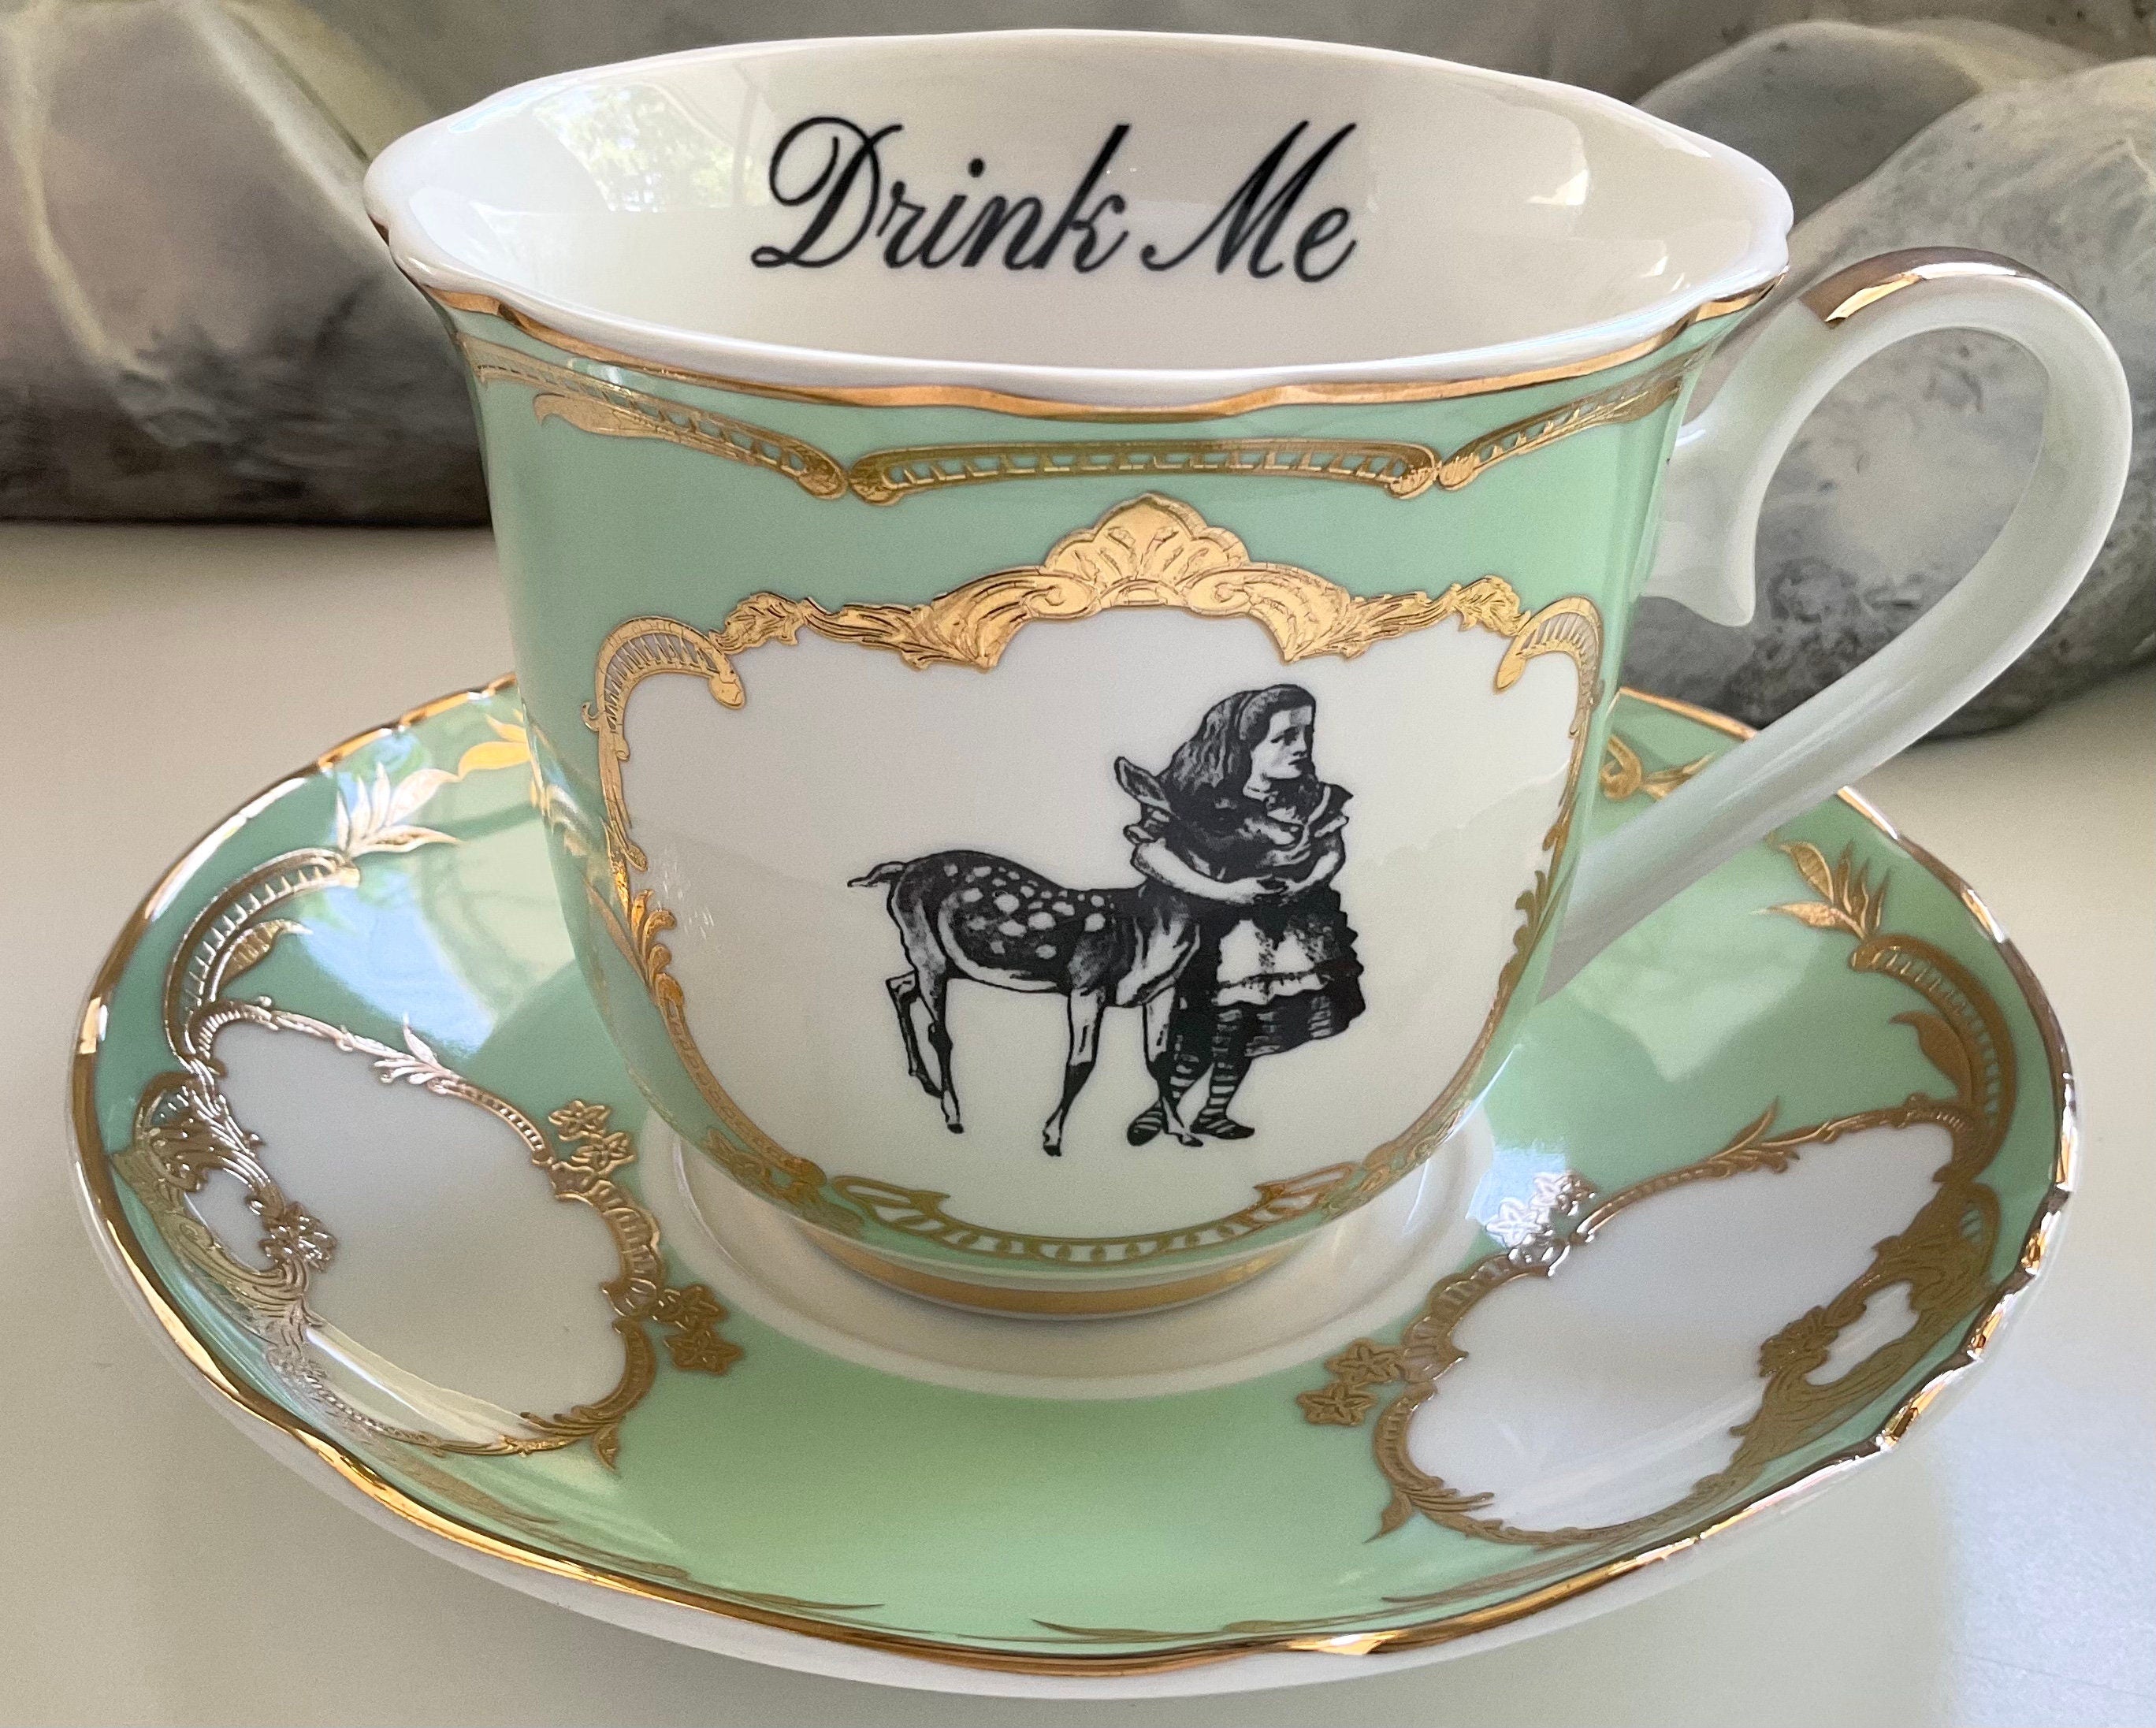 Alice in Wonderland Cup and Saucer